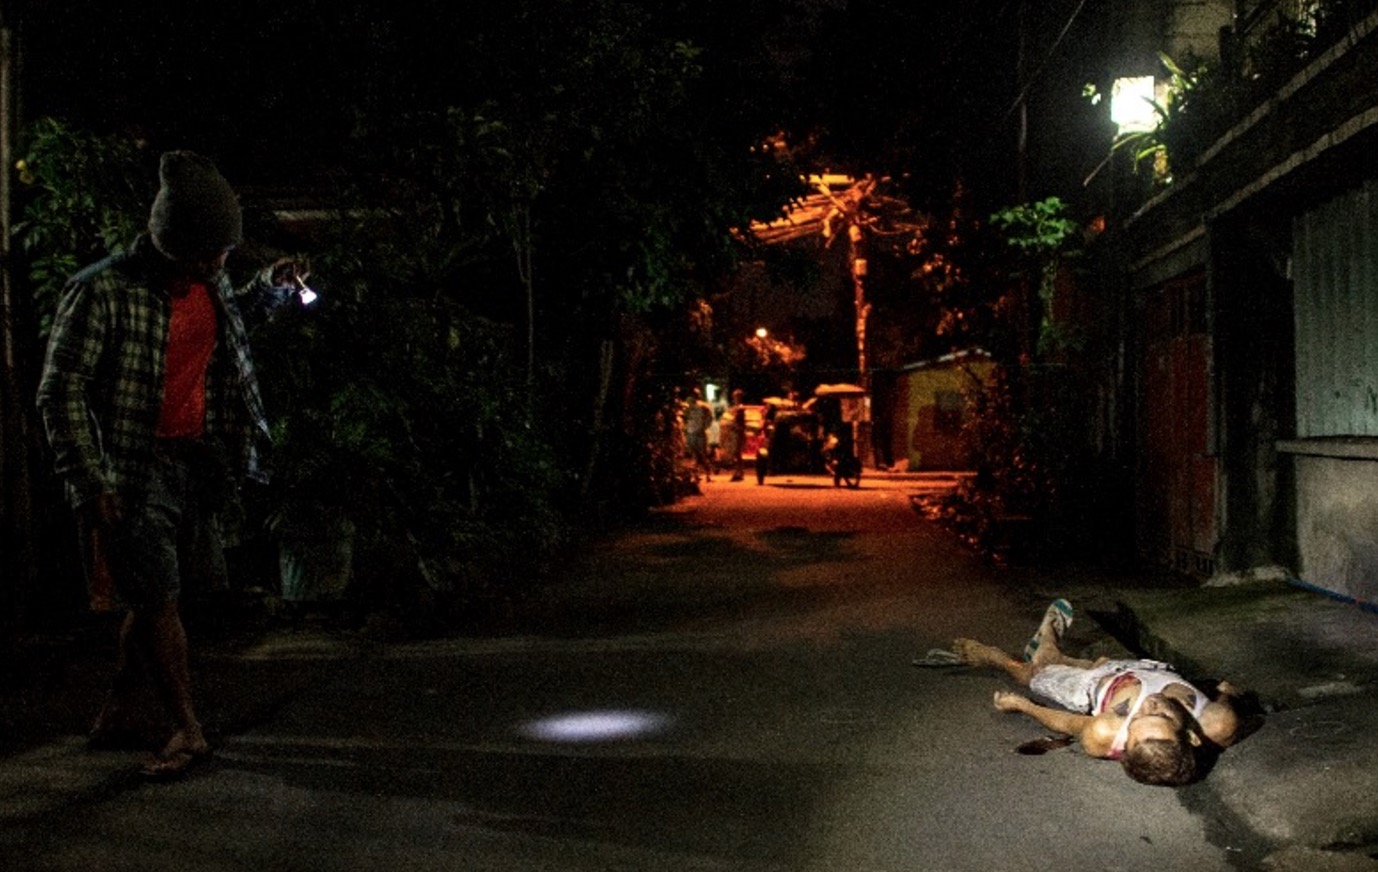 President Rodrigo Duterte’s office hailed its war on drugs a “success”, as police confirmed killing nearly 200 people in a two-month blitz. The Palace called on authorities to “seize the momentum”.  Noel Celis/AFP